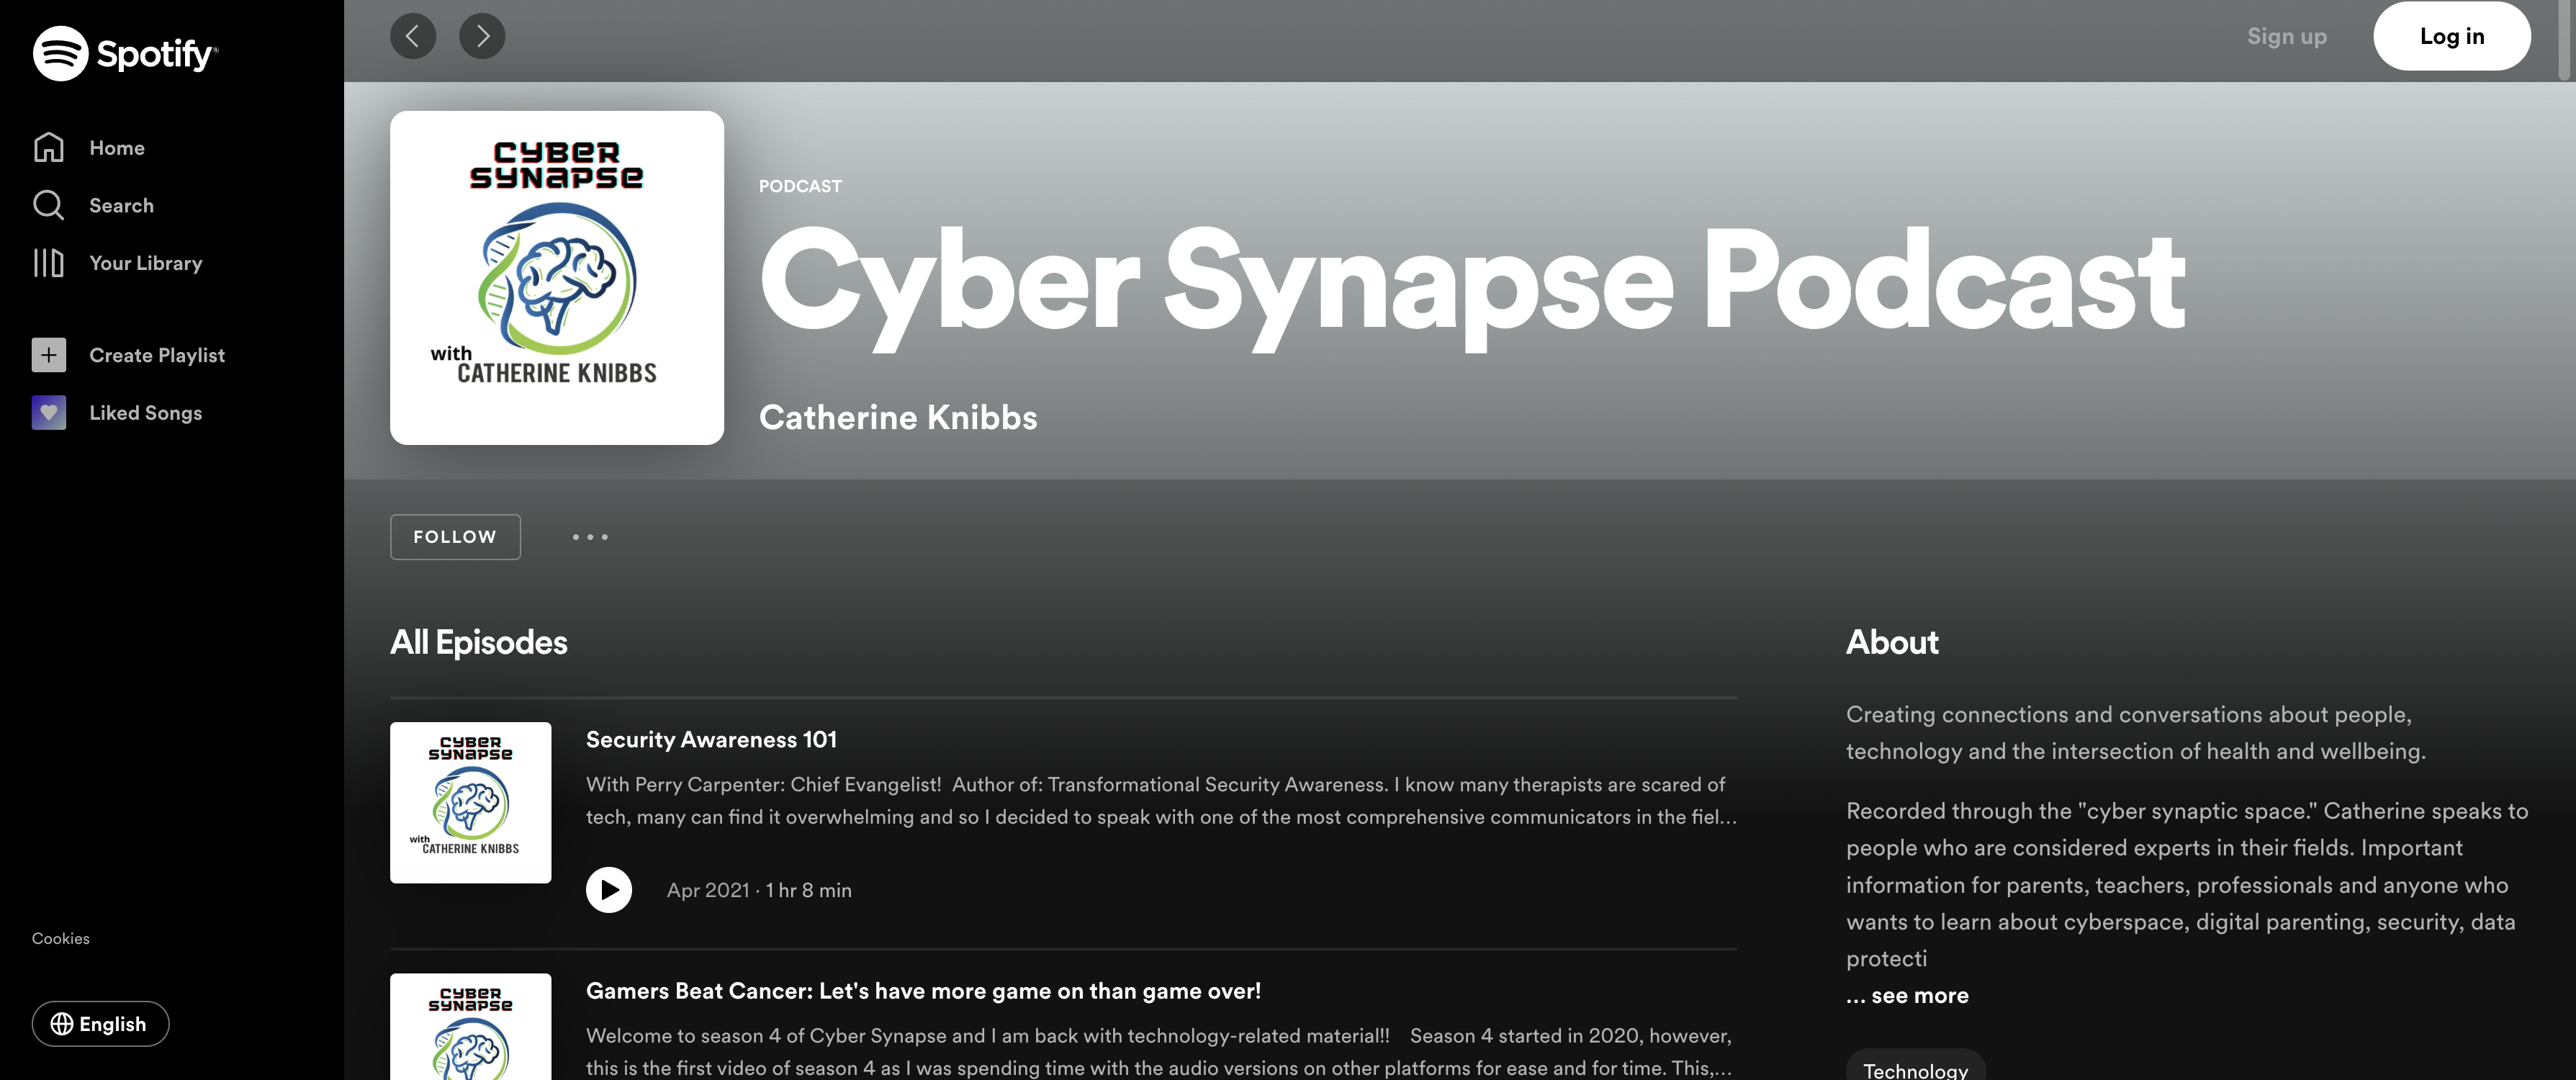 cyber synapse podcast